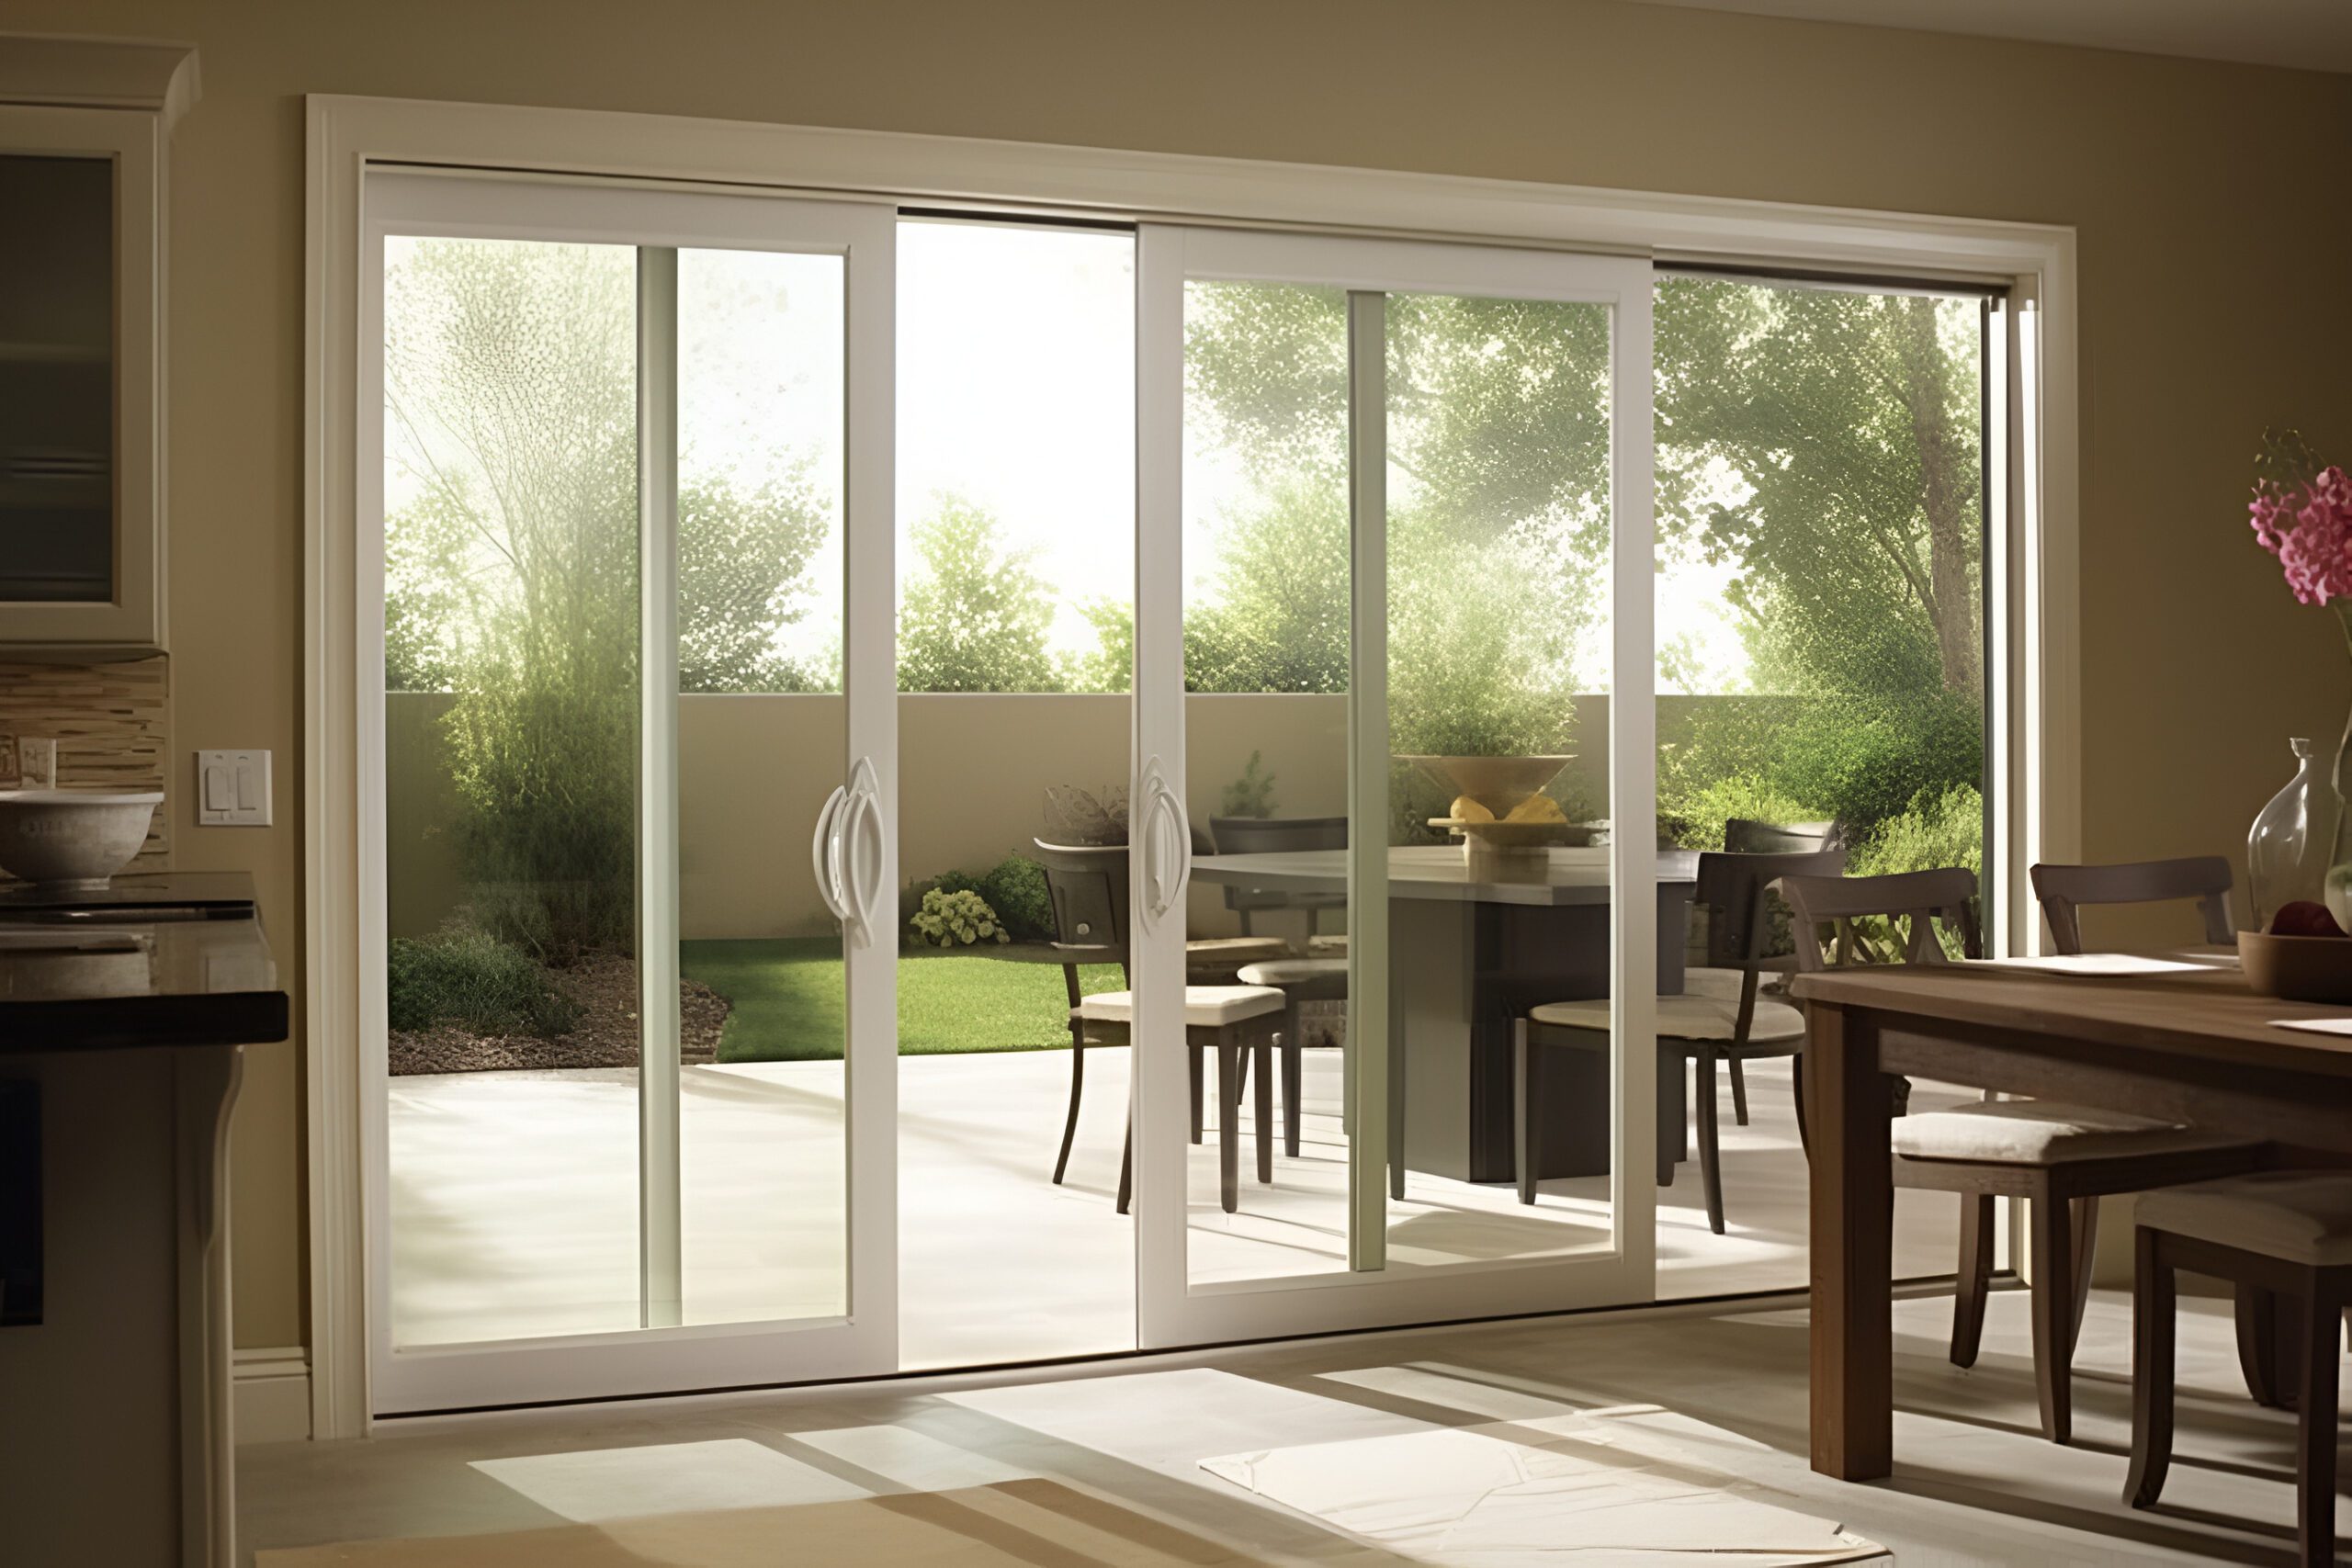 Outdoor space with large sliding patio door next to dining room